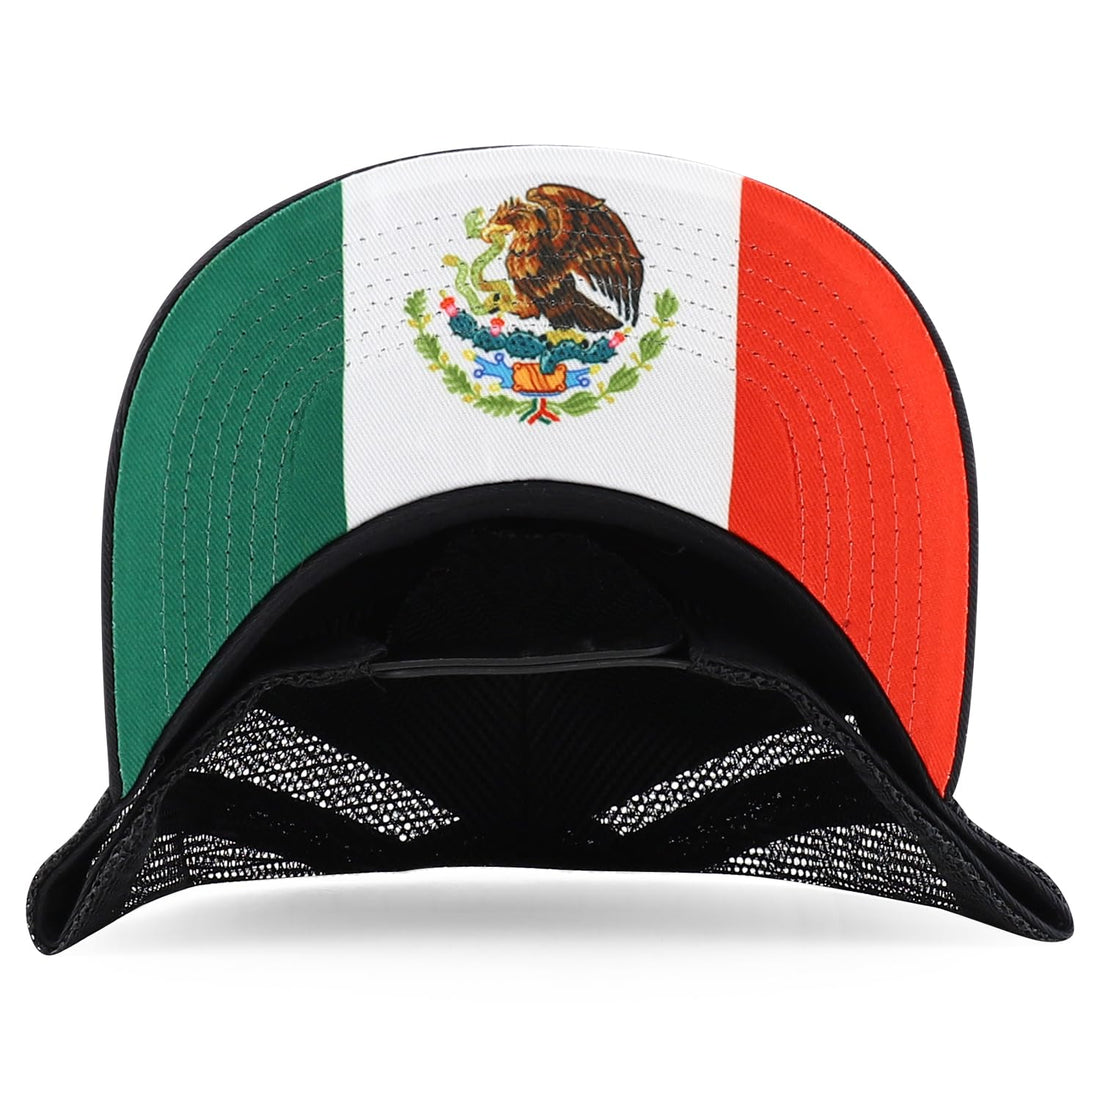 Trendy Apparel Shop Flag of Mexico State 5 Panel Mesh Back Snapback Cap